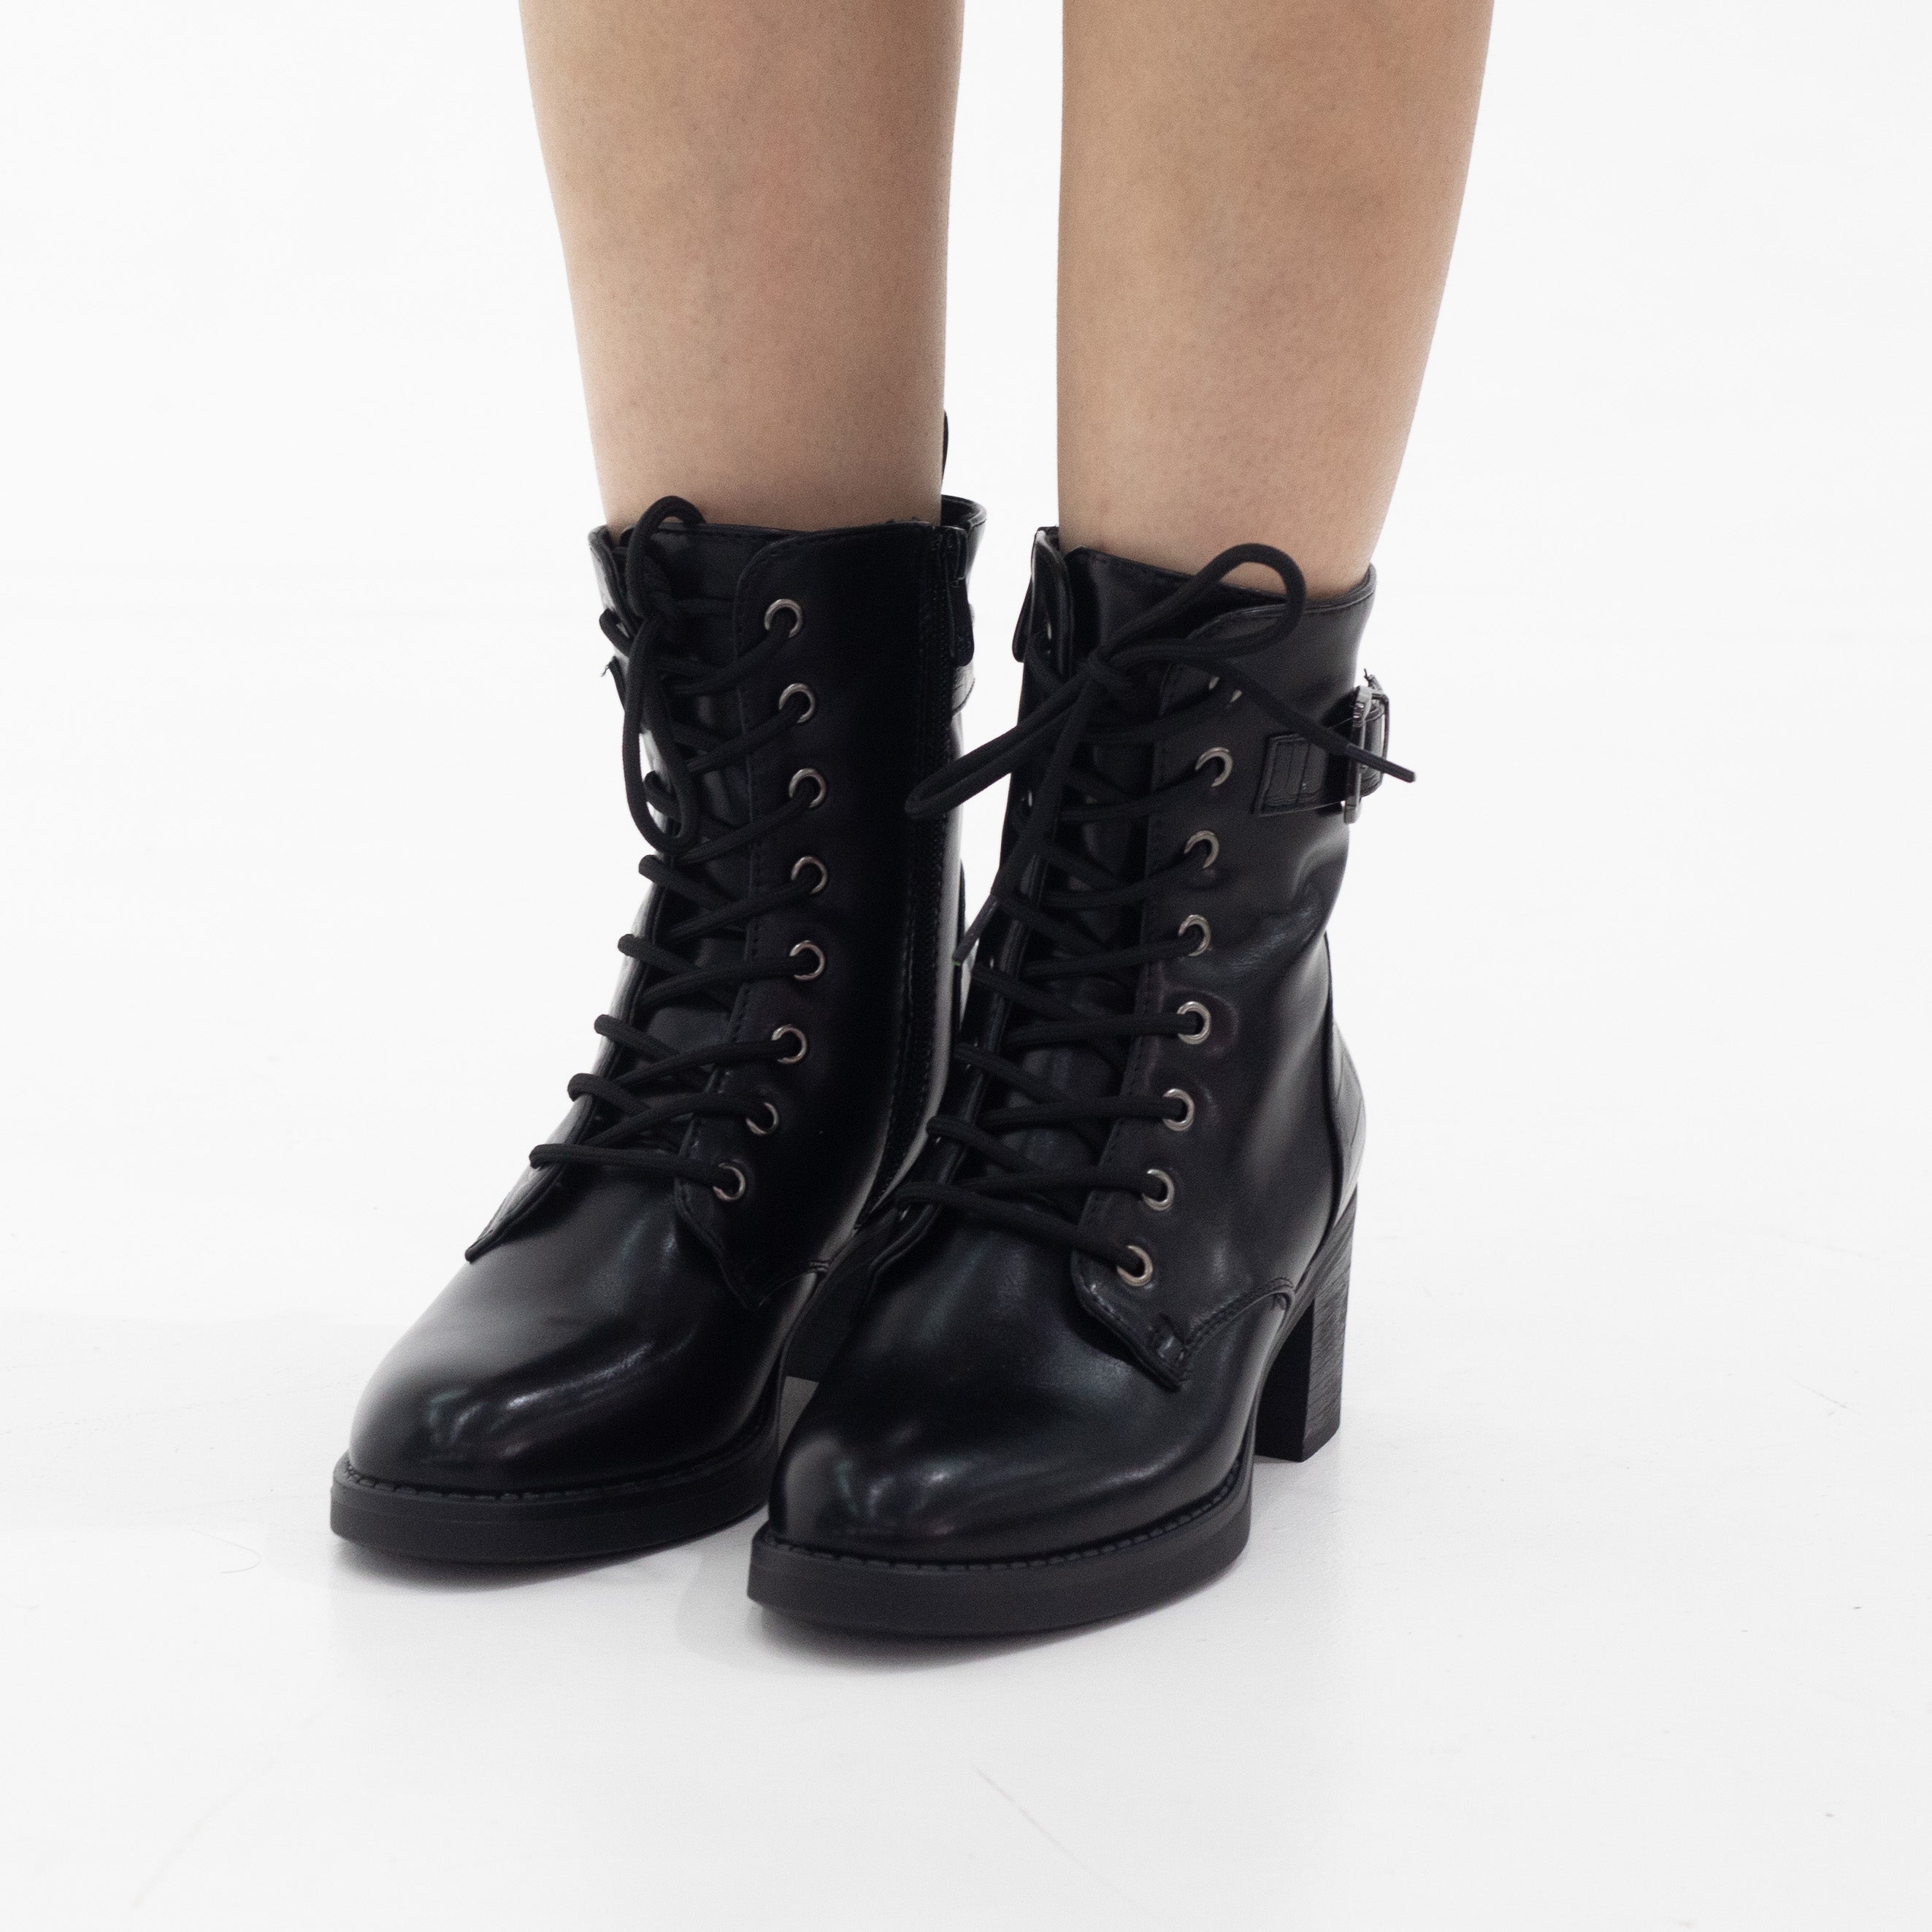 Black biker lace up 6.cm heel ankle boot maddy